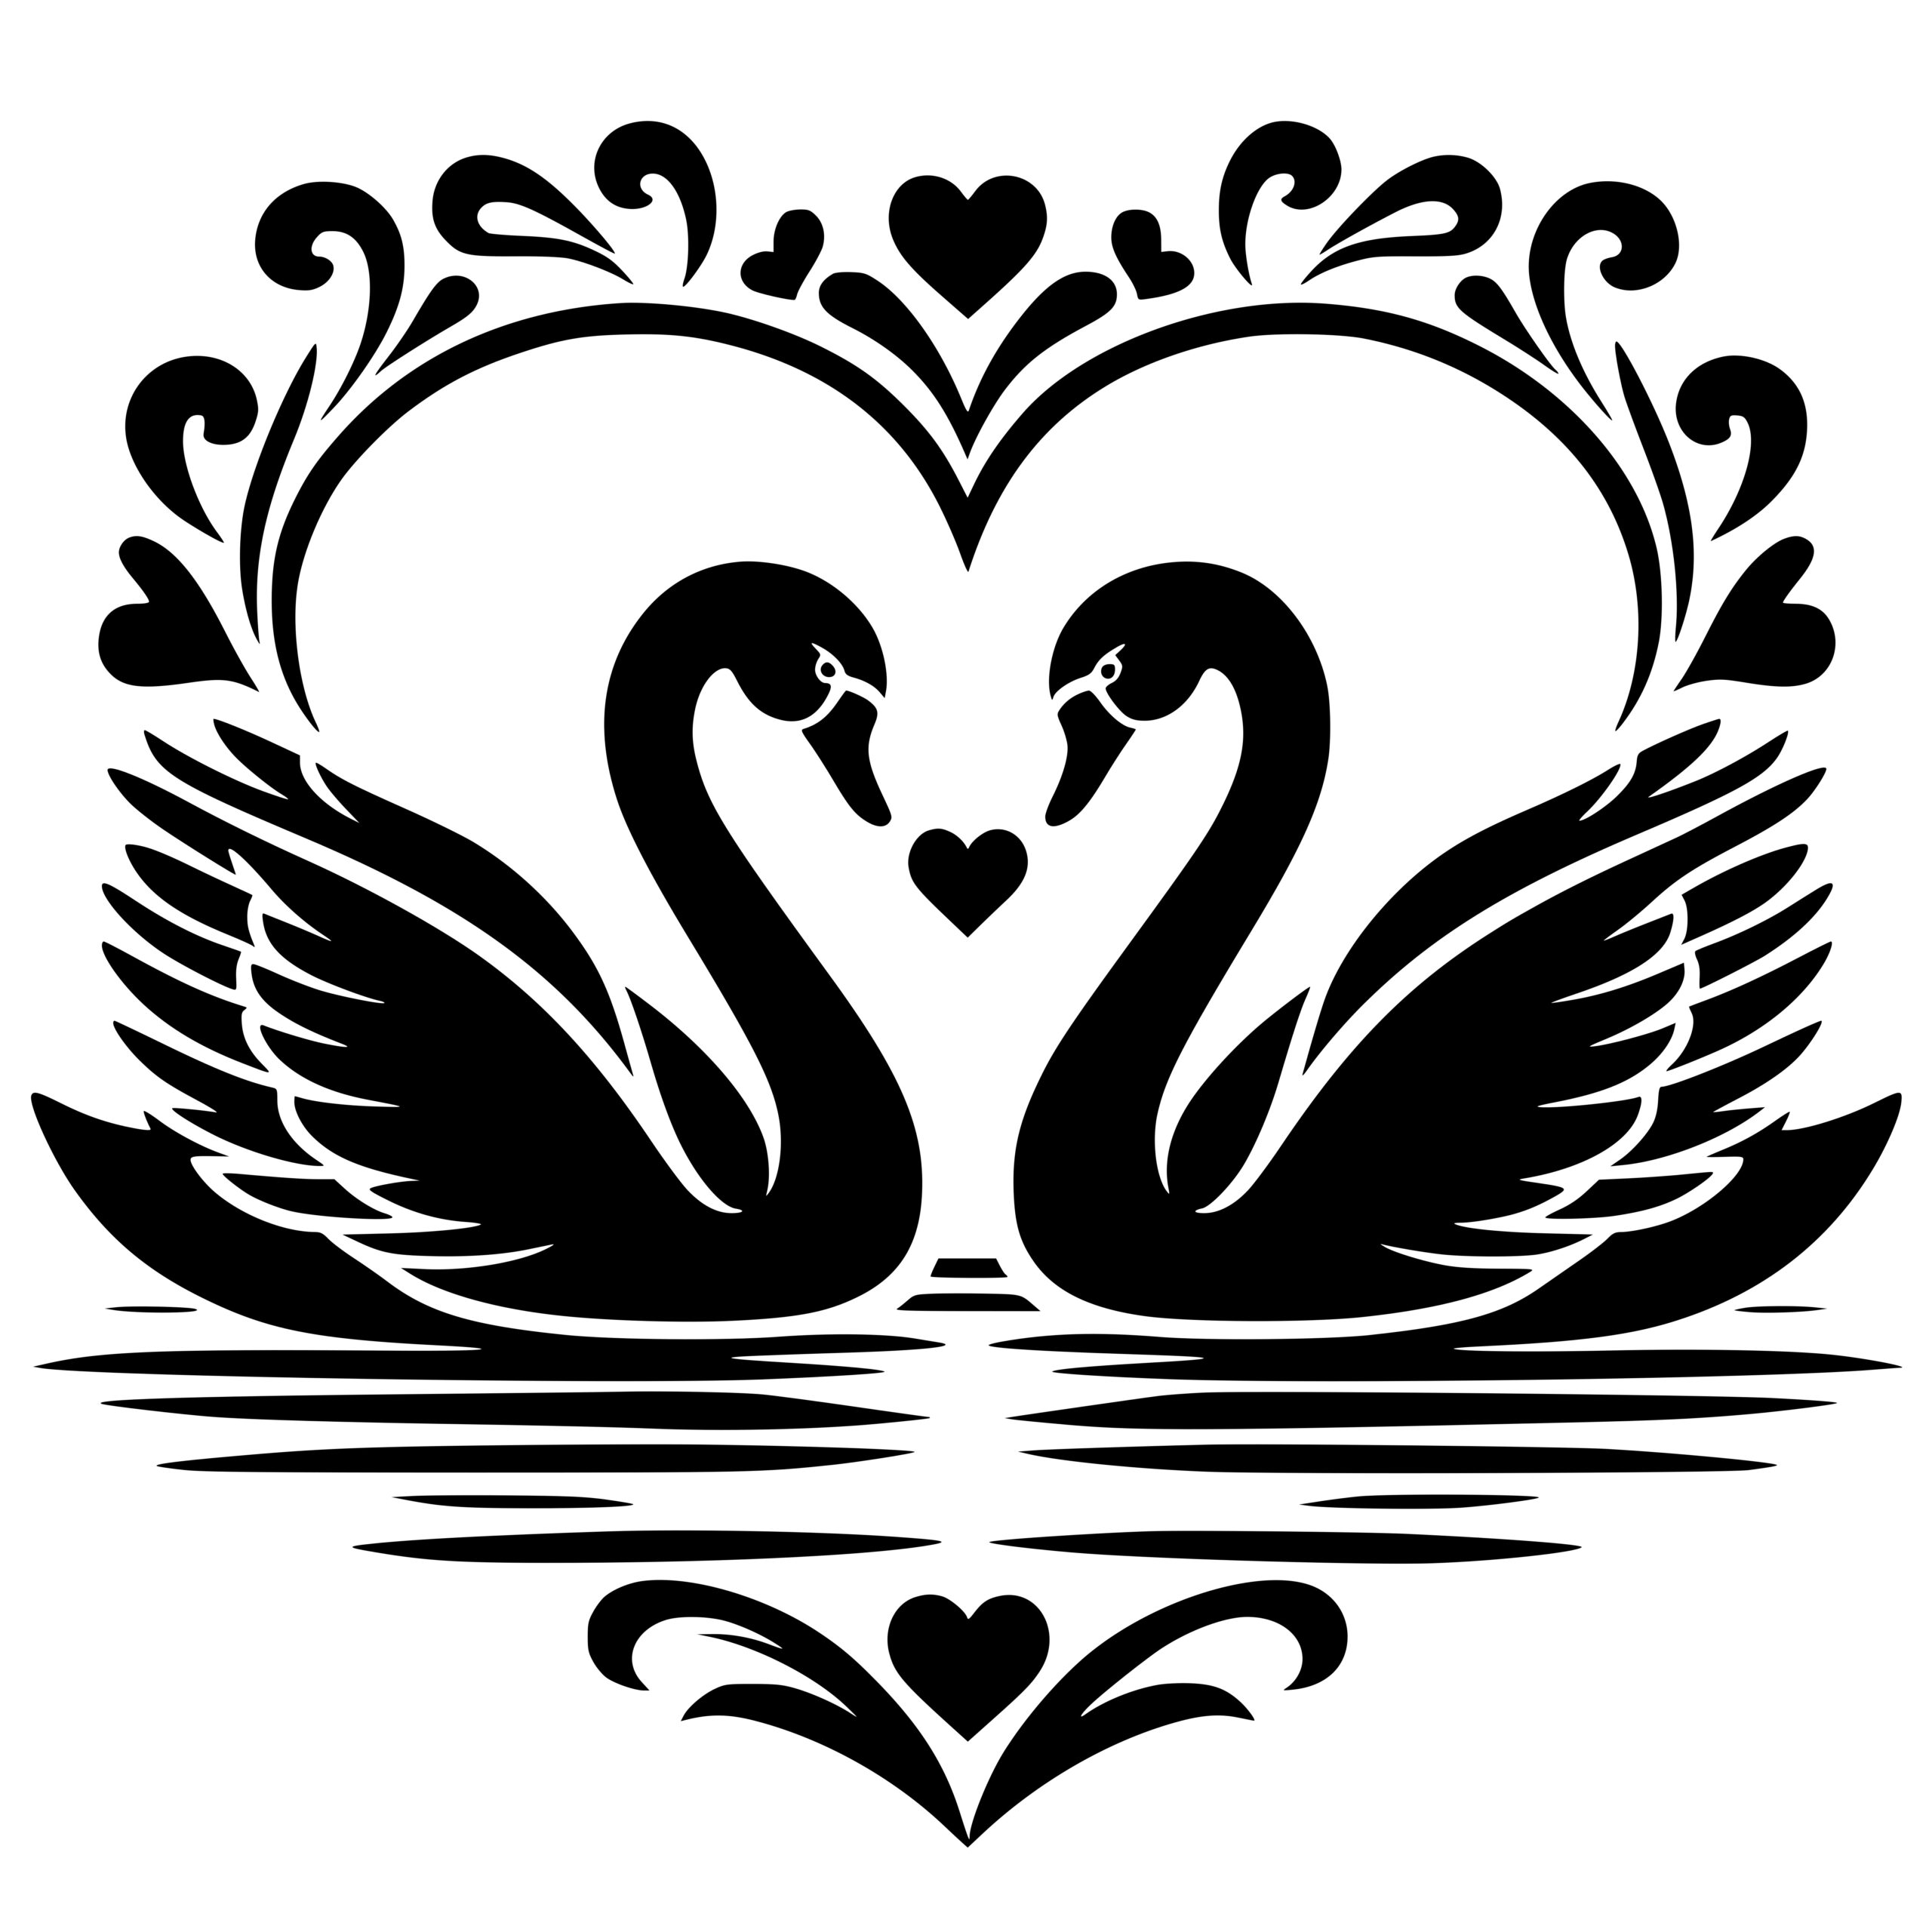 Swans’ Heart Reflection SVG File for Cricut, Laser, Silhouette, Cameo